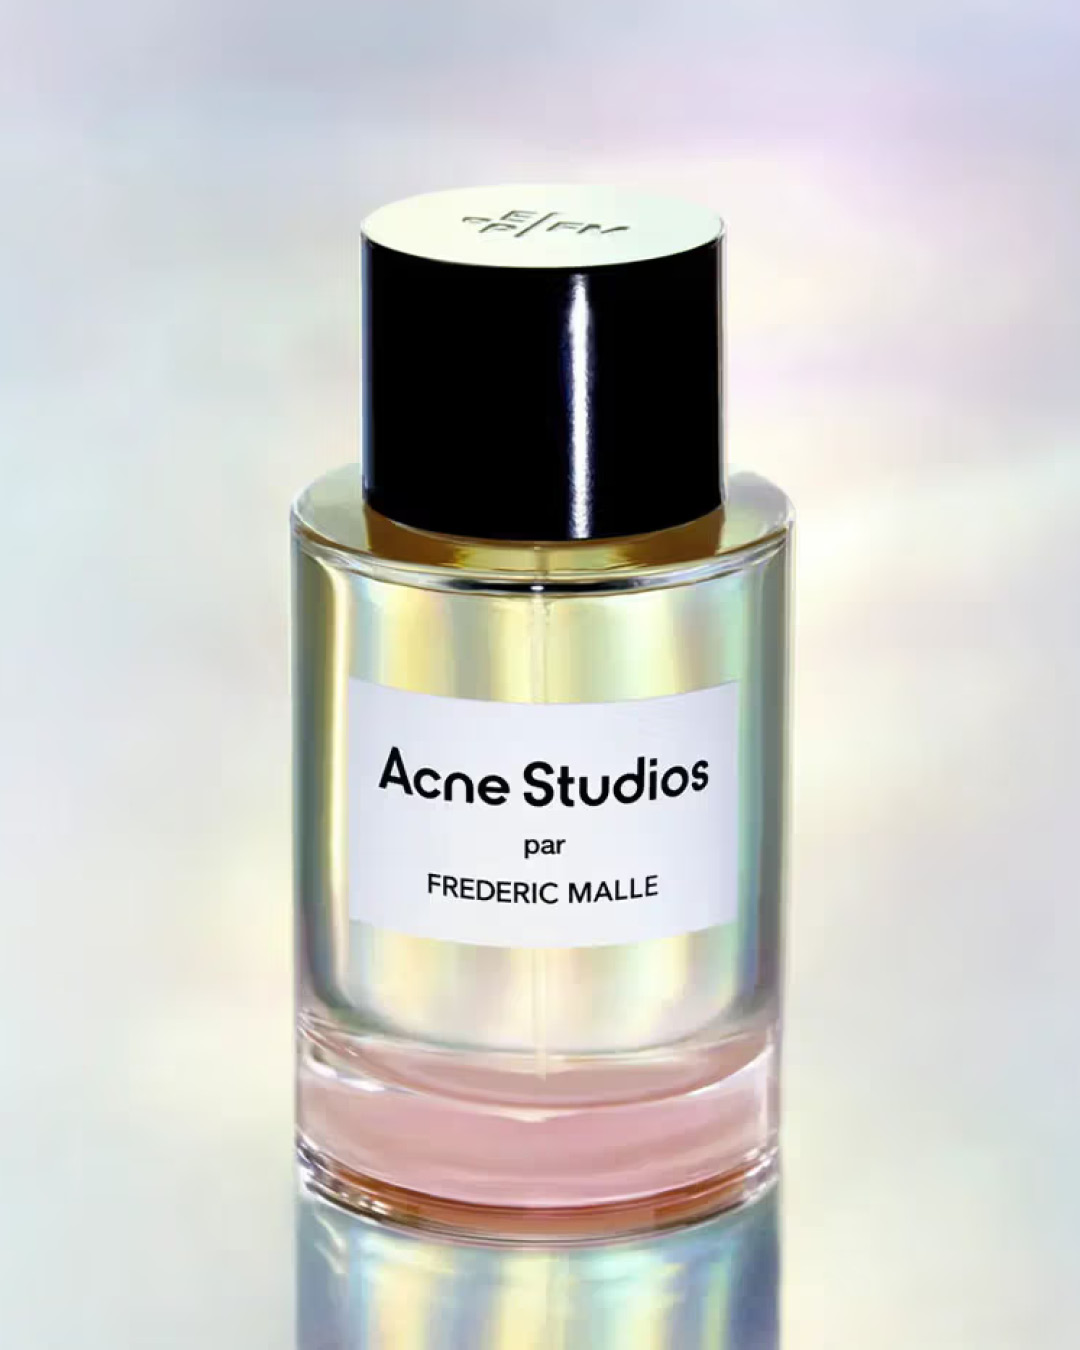 Acne Studios Launches First Fragrance with Frederic Malle